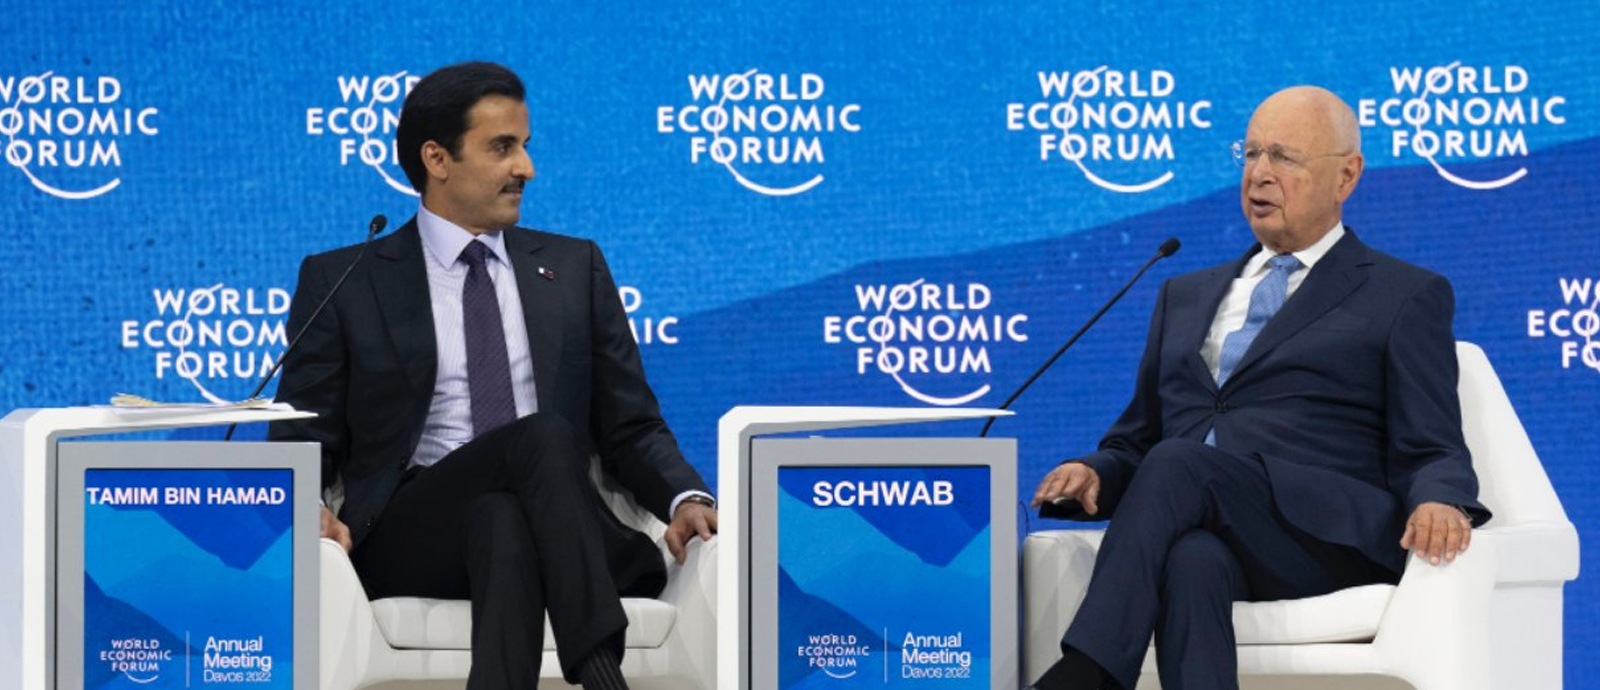 H.H. the Emir Sheikh Tamim bin Hamad al-Thani took part in a panel discussion on the FIFA World Cup Qatar 2022